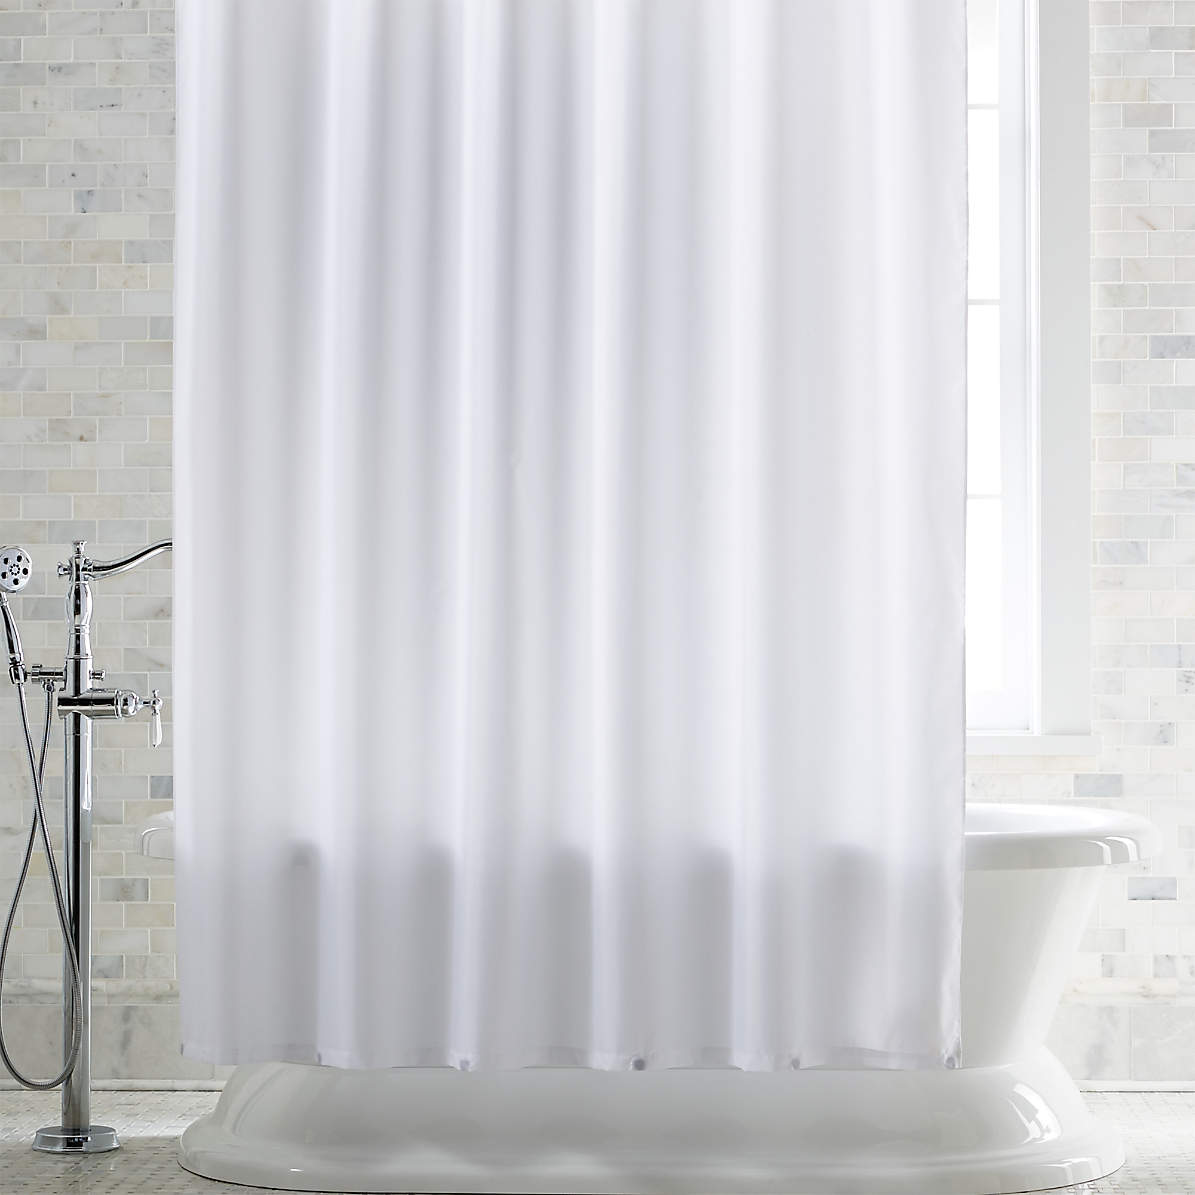 White Shower Curtain Liner With Magnets, Do All Shower Curtains Need Liners